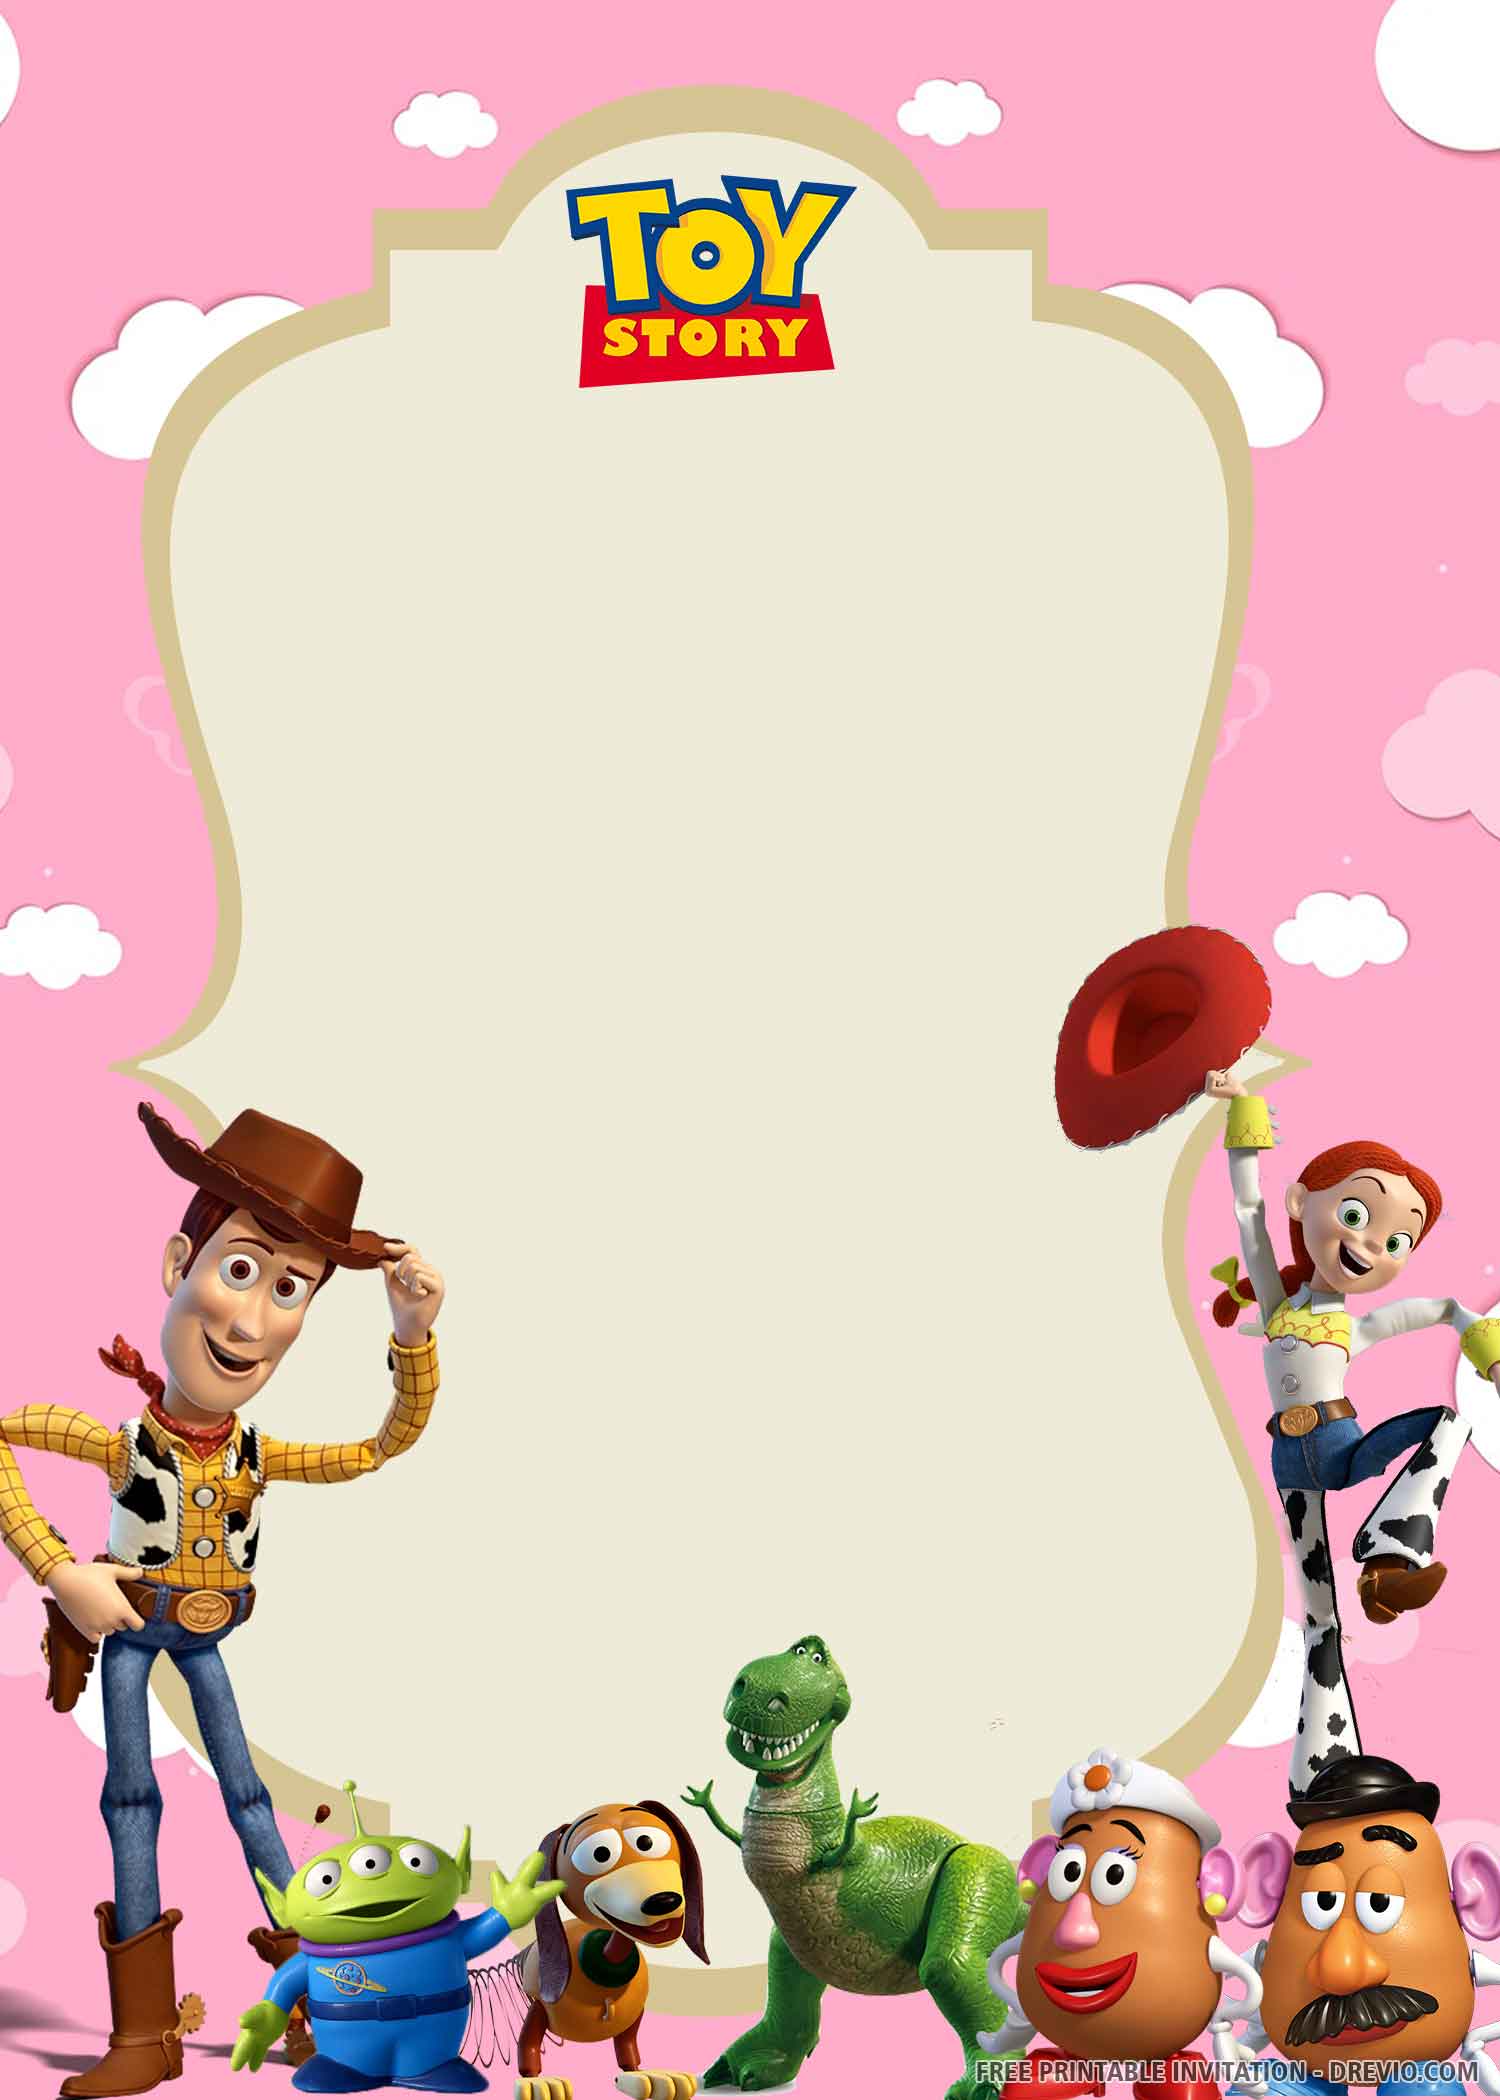  FREE PRINTABLE Toy Story Birthday Invitation Template Download Hundreds FREE PRINTABLE